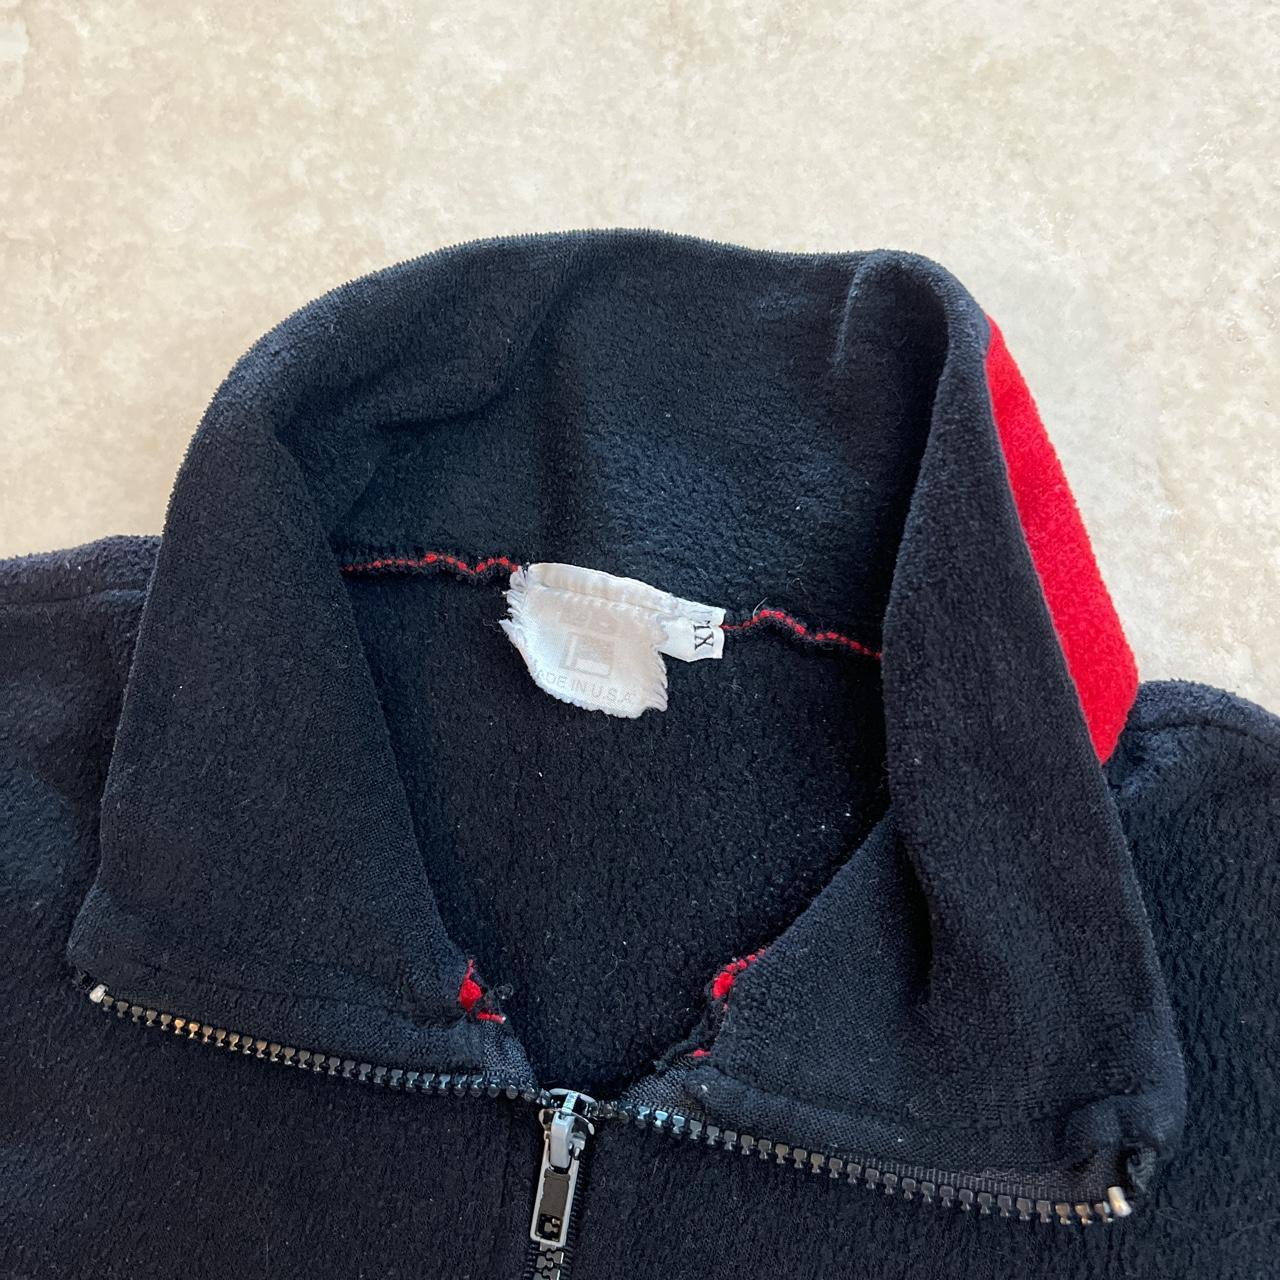 Y2k USA FUBU Fleece Sweater Some Staining And Hole... - Depop